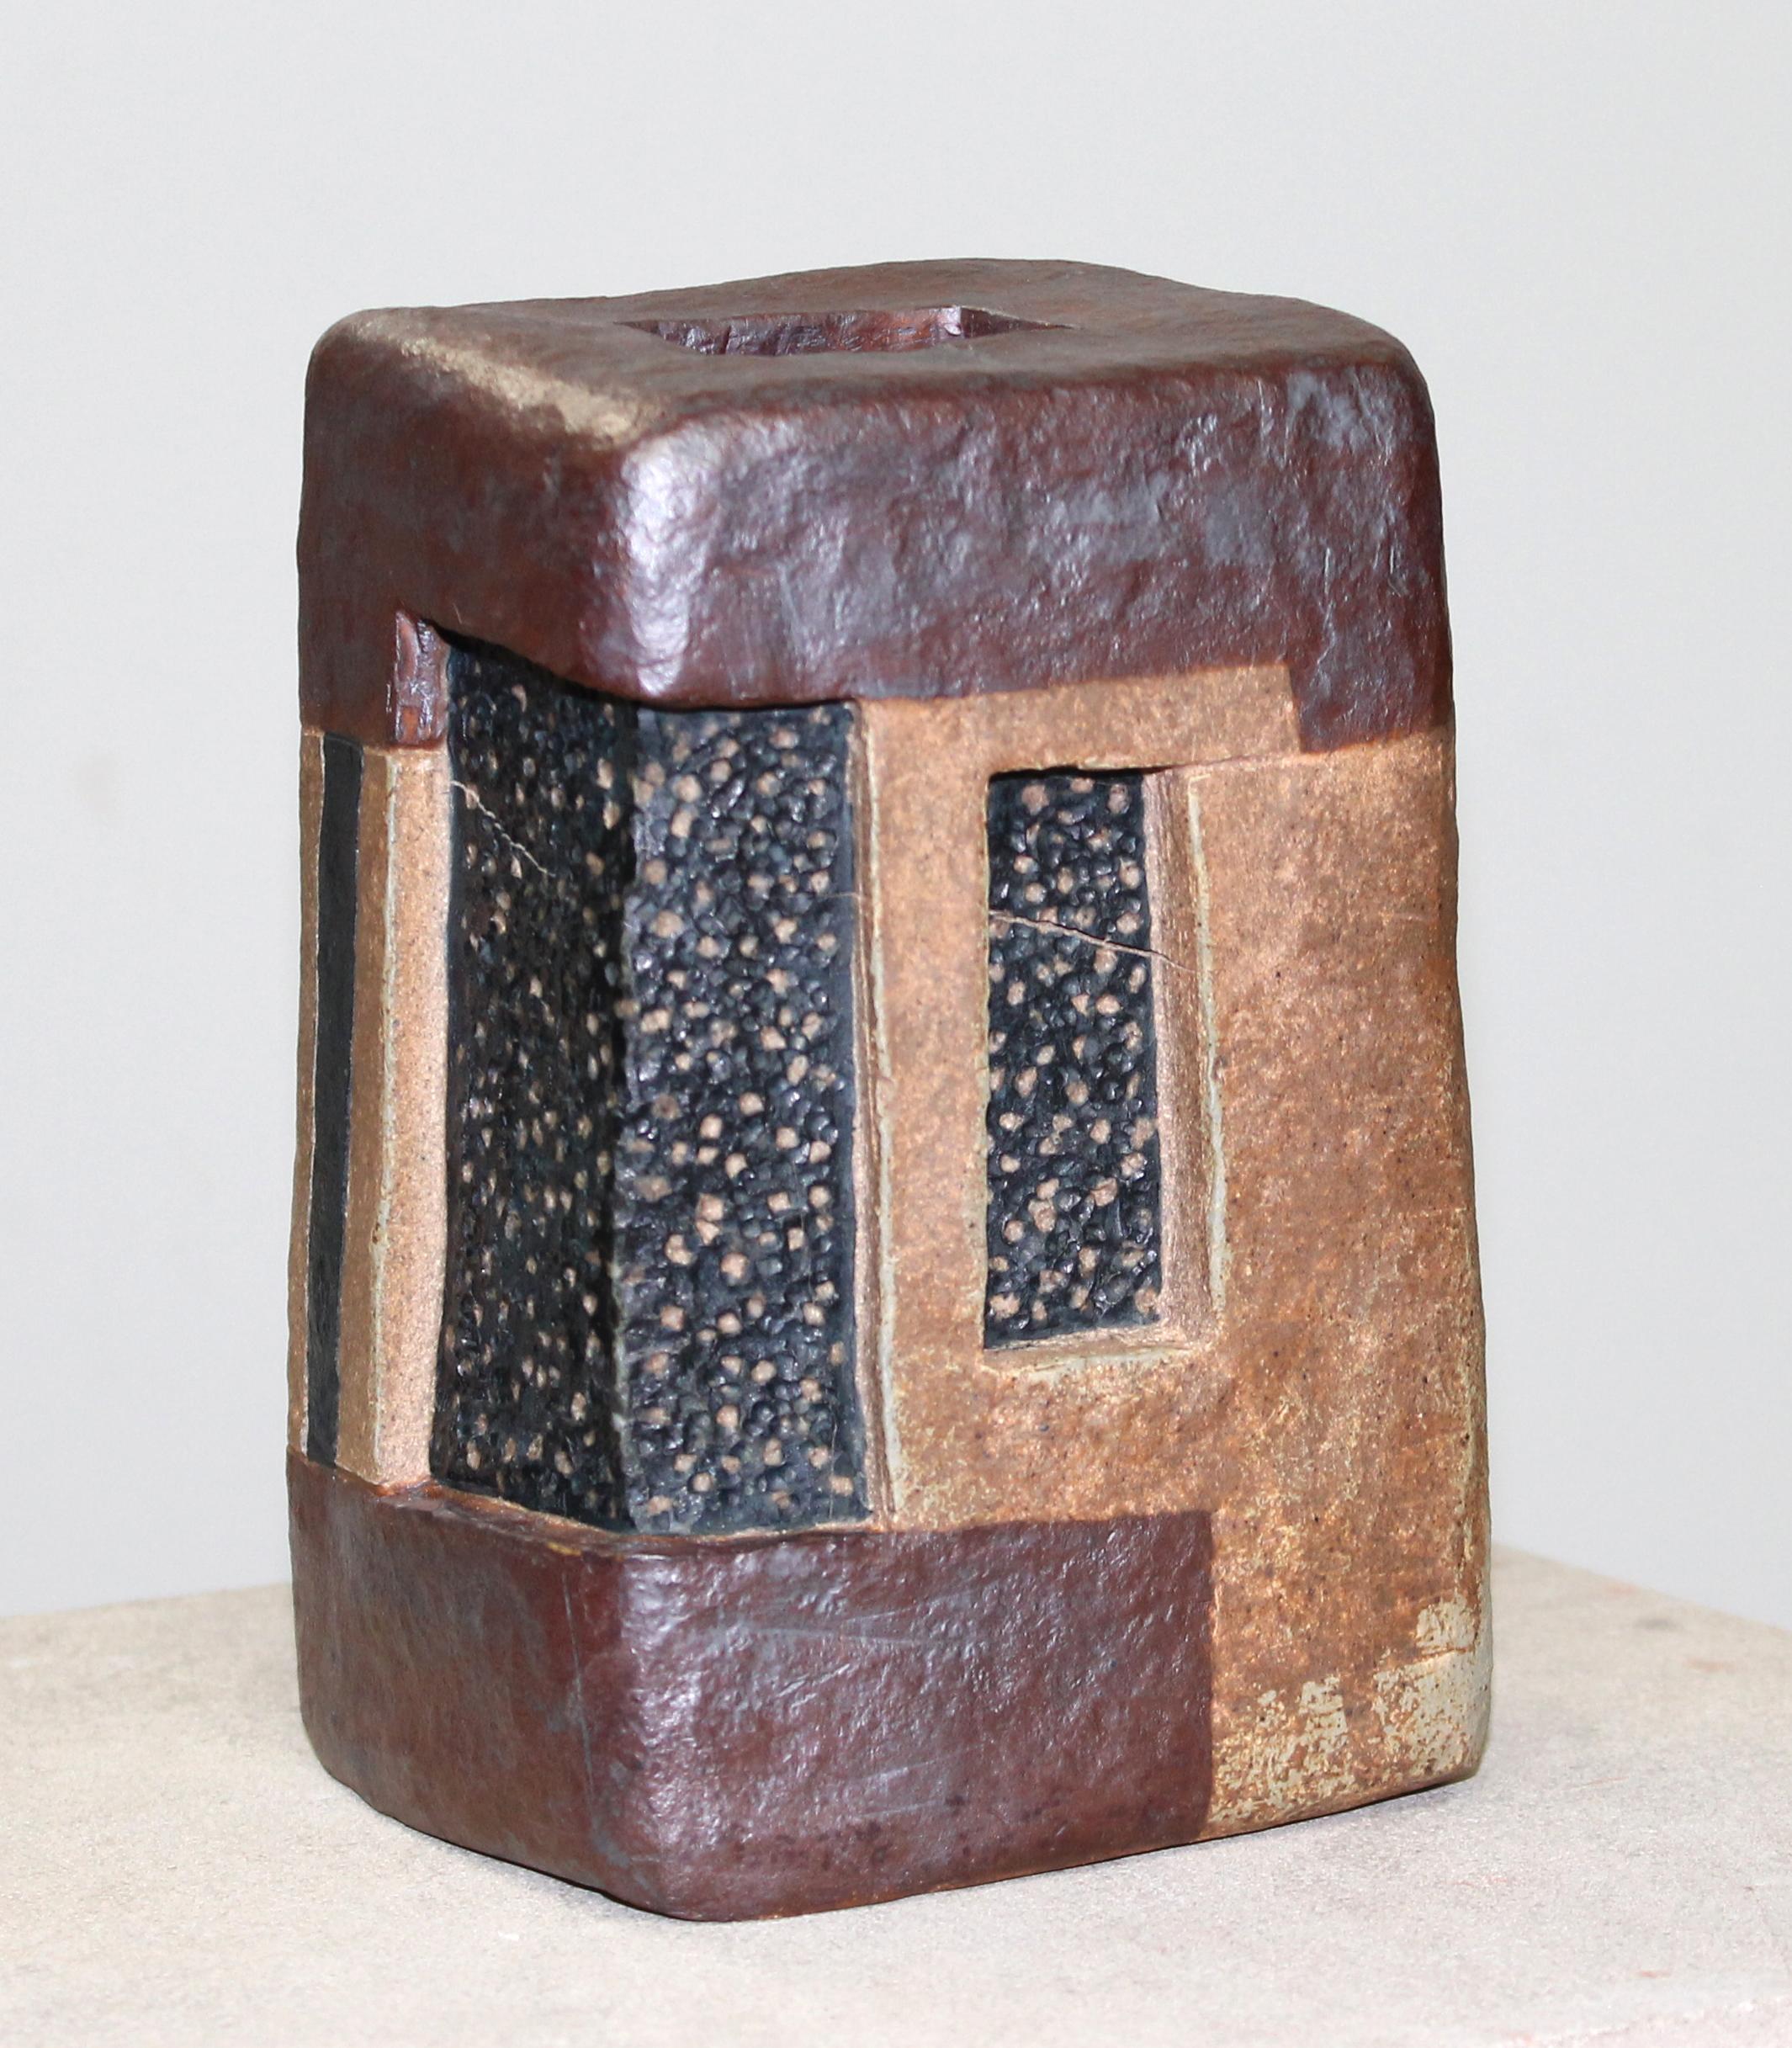 "MONUMENT", sculpture, clay, abstract, geometry, contemporary, ceramic, tribal